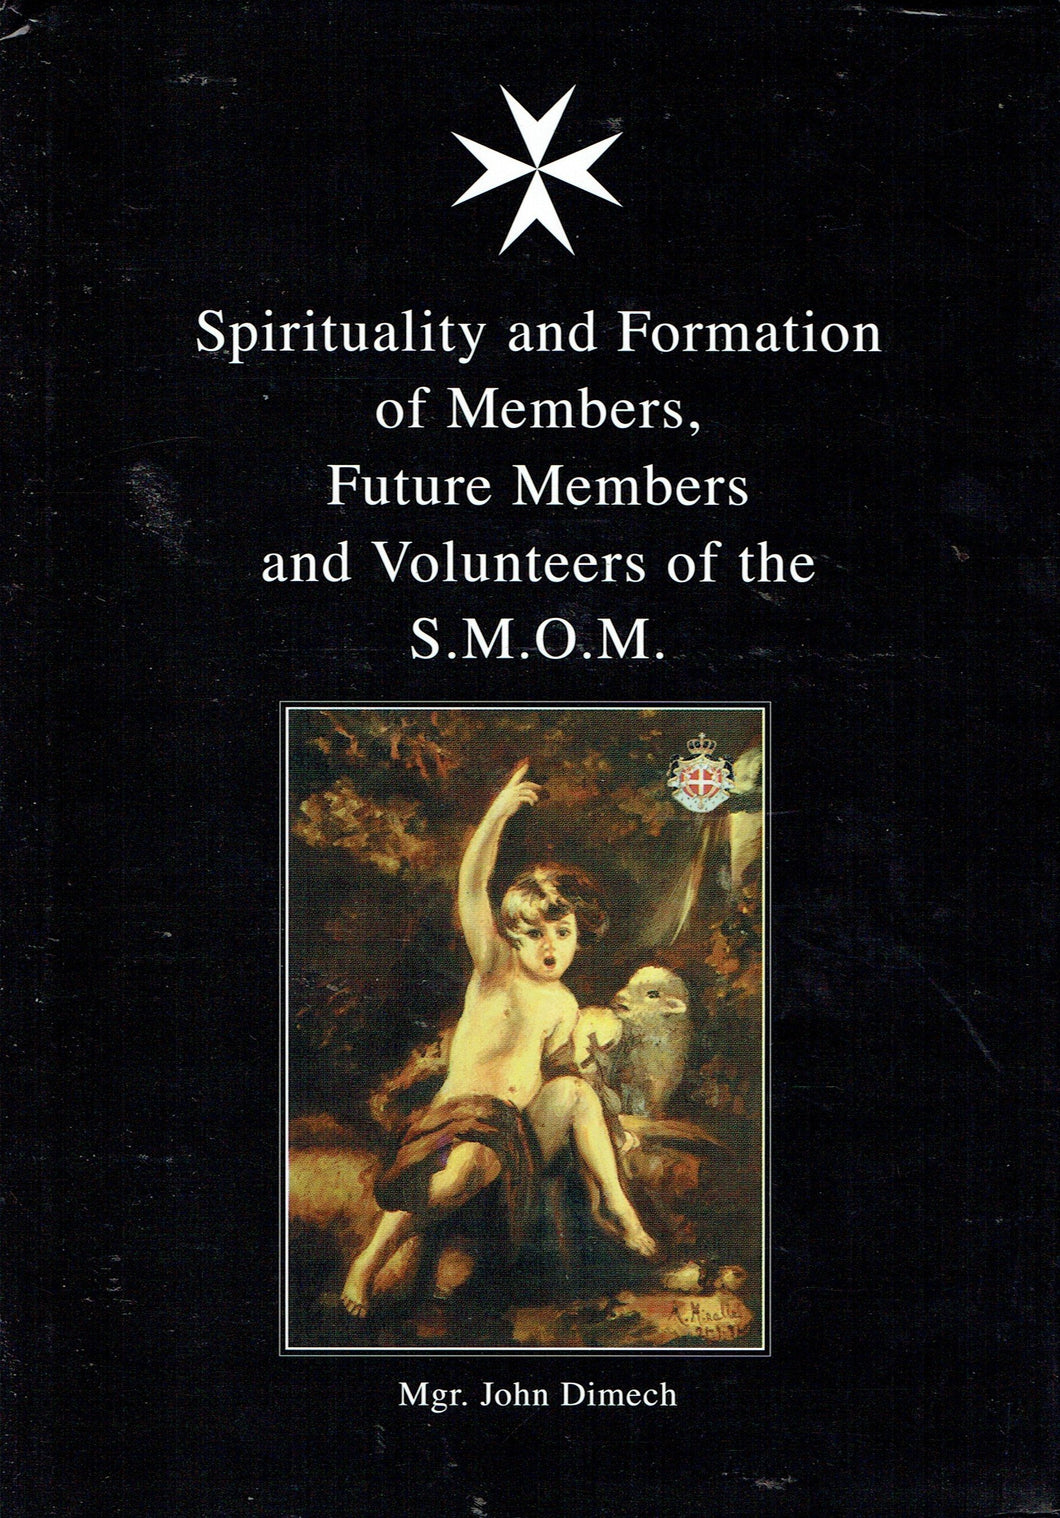 Spirituality and Formation of Members, Future Members and Volunteers of the S.M.O.M.